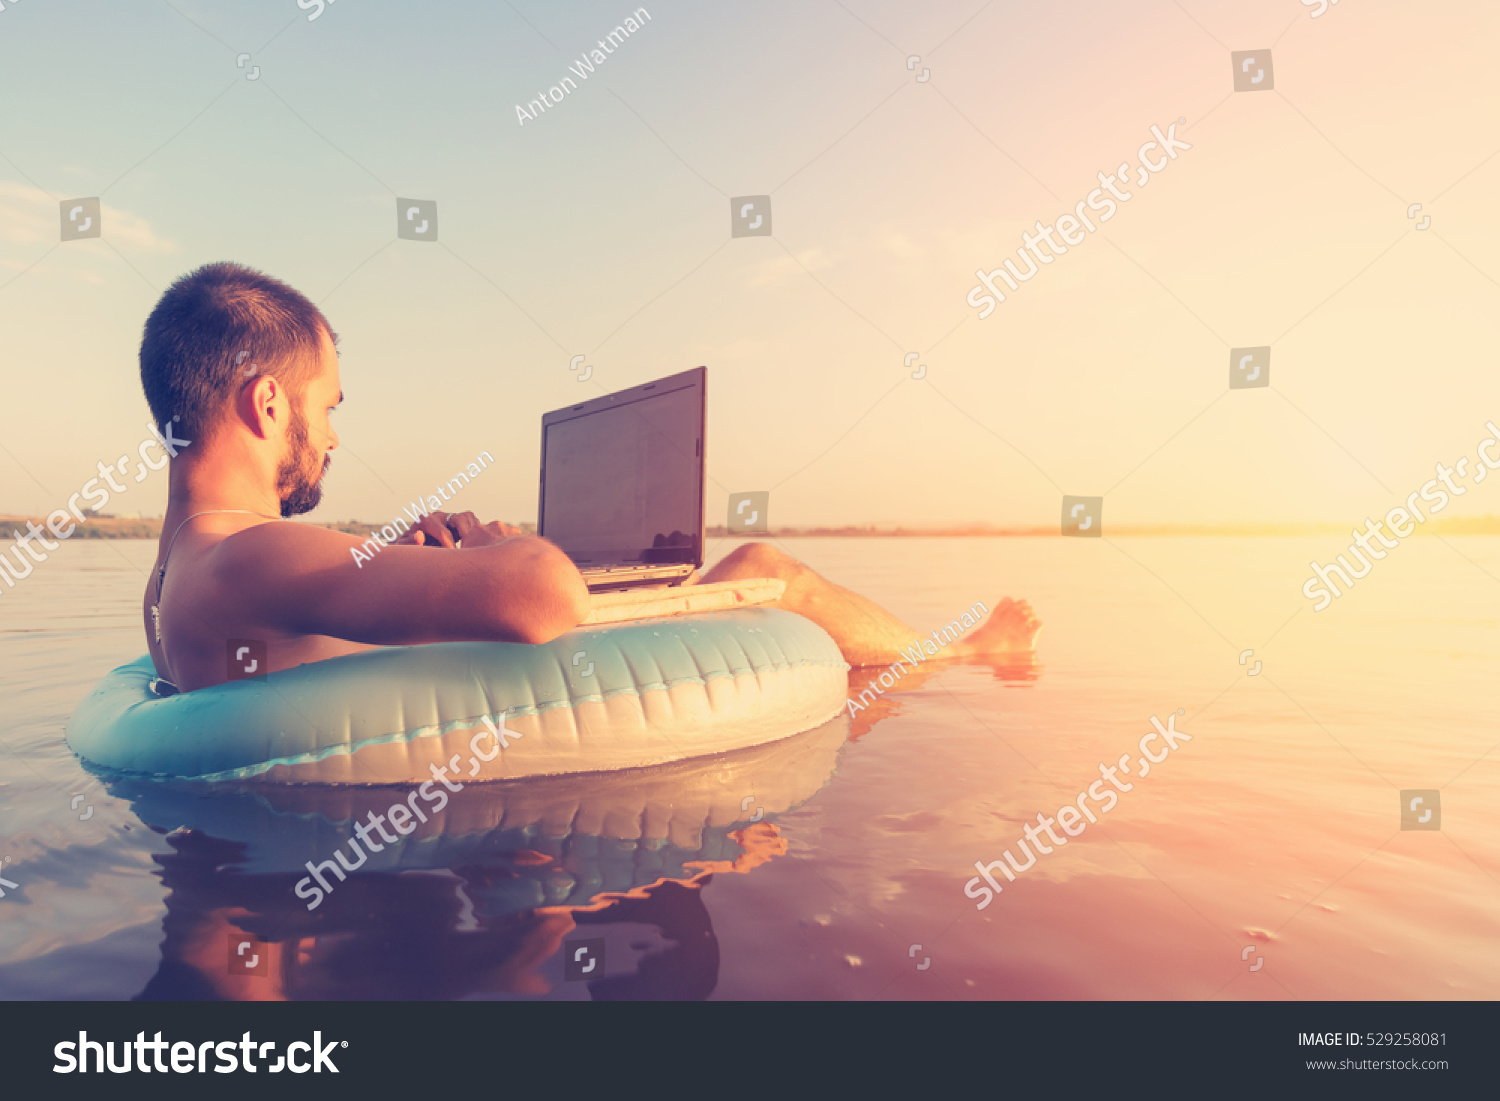 stock photo man with a laptop on inflatable ring in the water 529258081